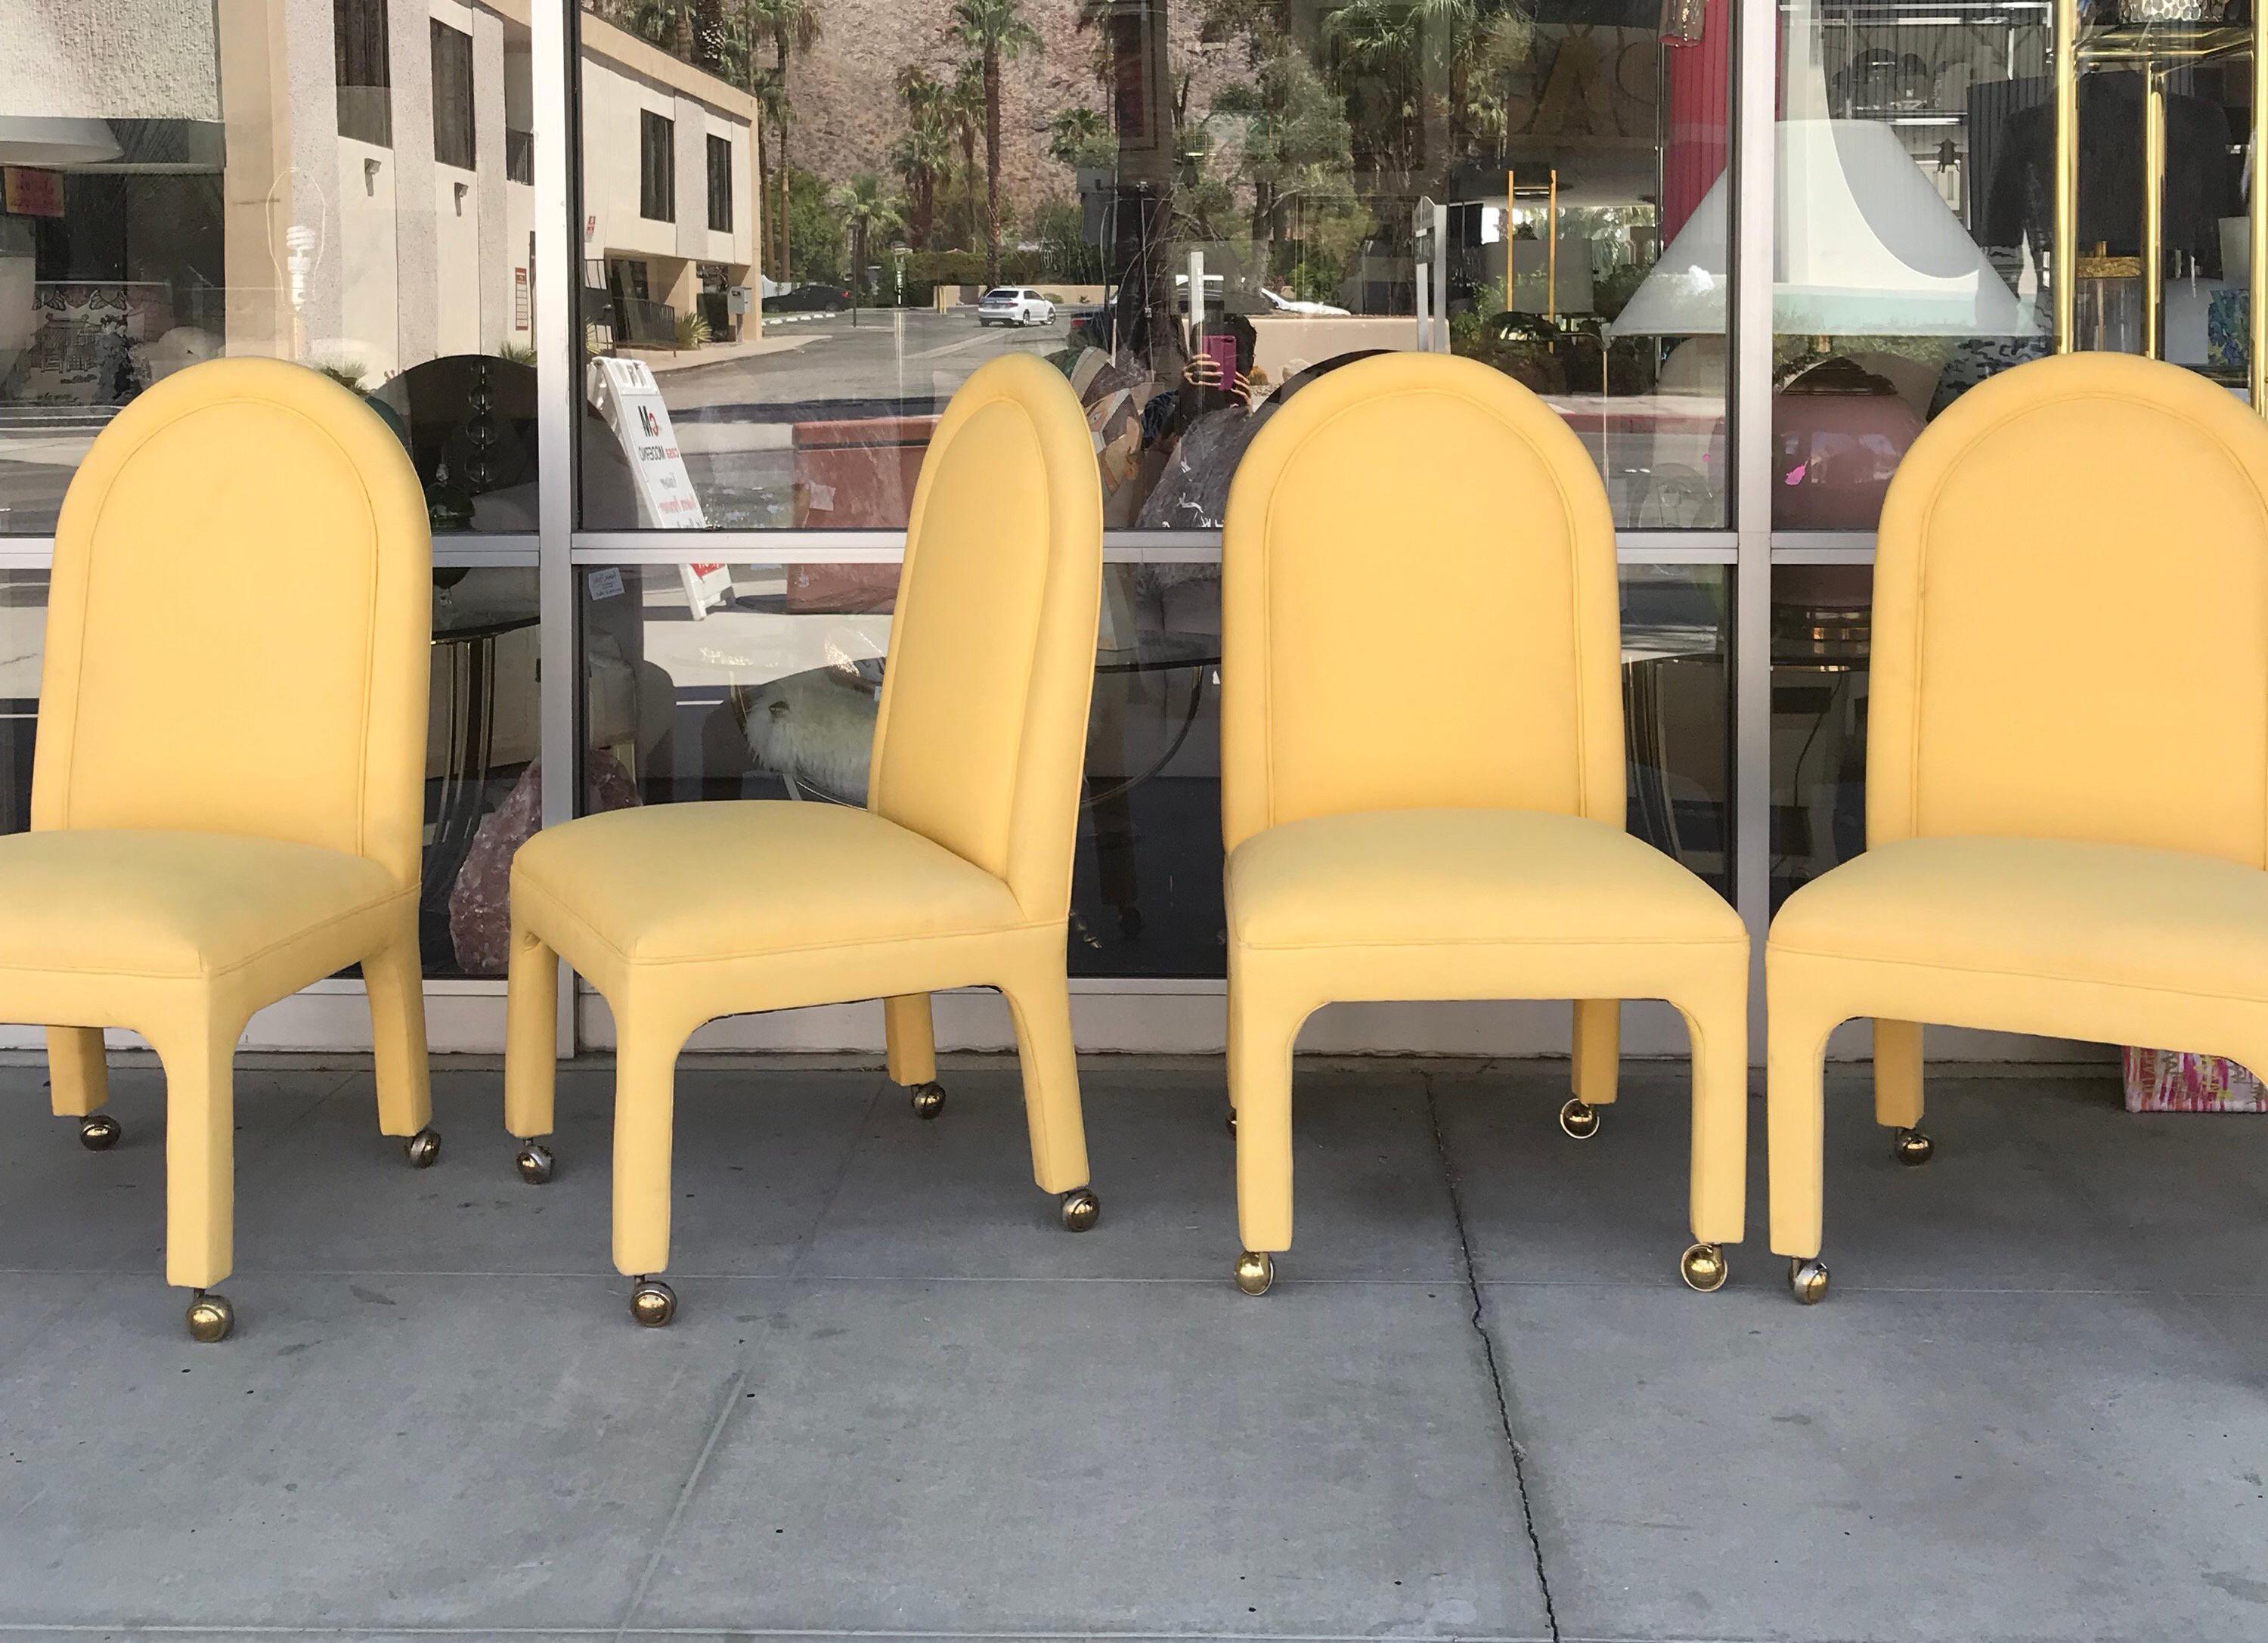 A set of four patio dining chairs perfect for indoor or outdoor use done in real Sunbrella fabric. Modern, classic Hollywood Regency styling. Original brass casters for easy mobility. From a very cool vintage Palm Springs Estate.